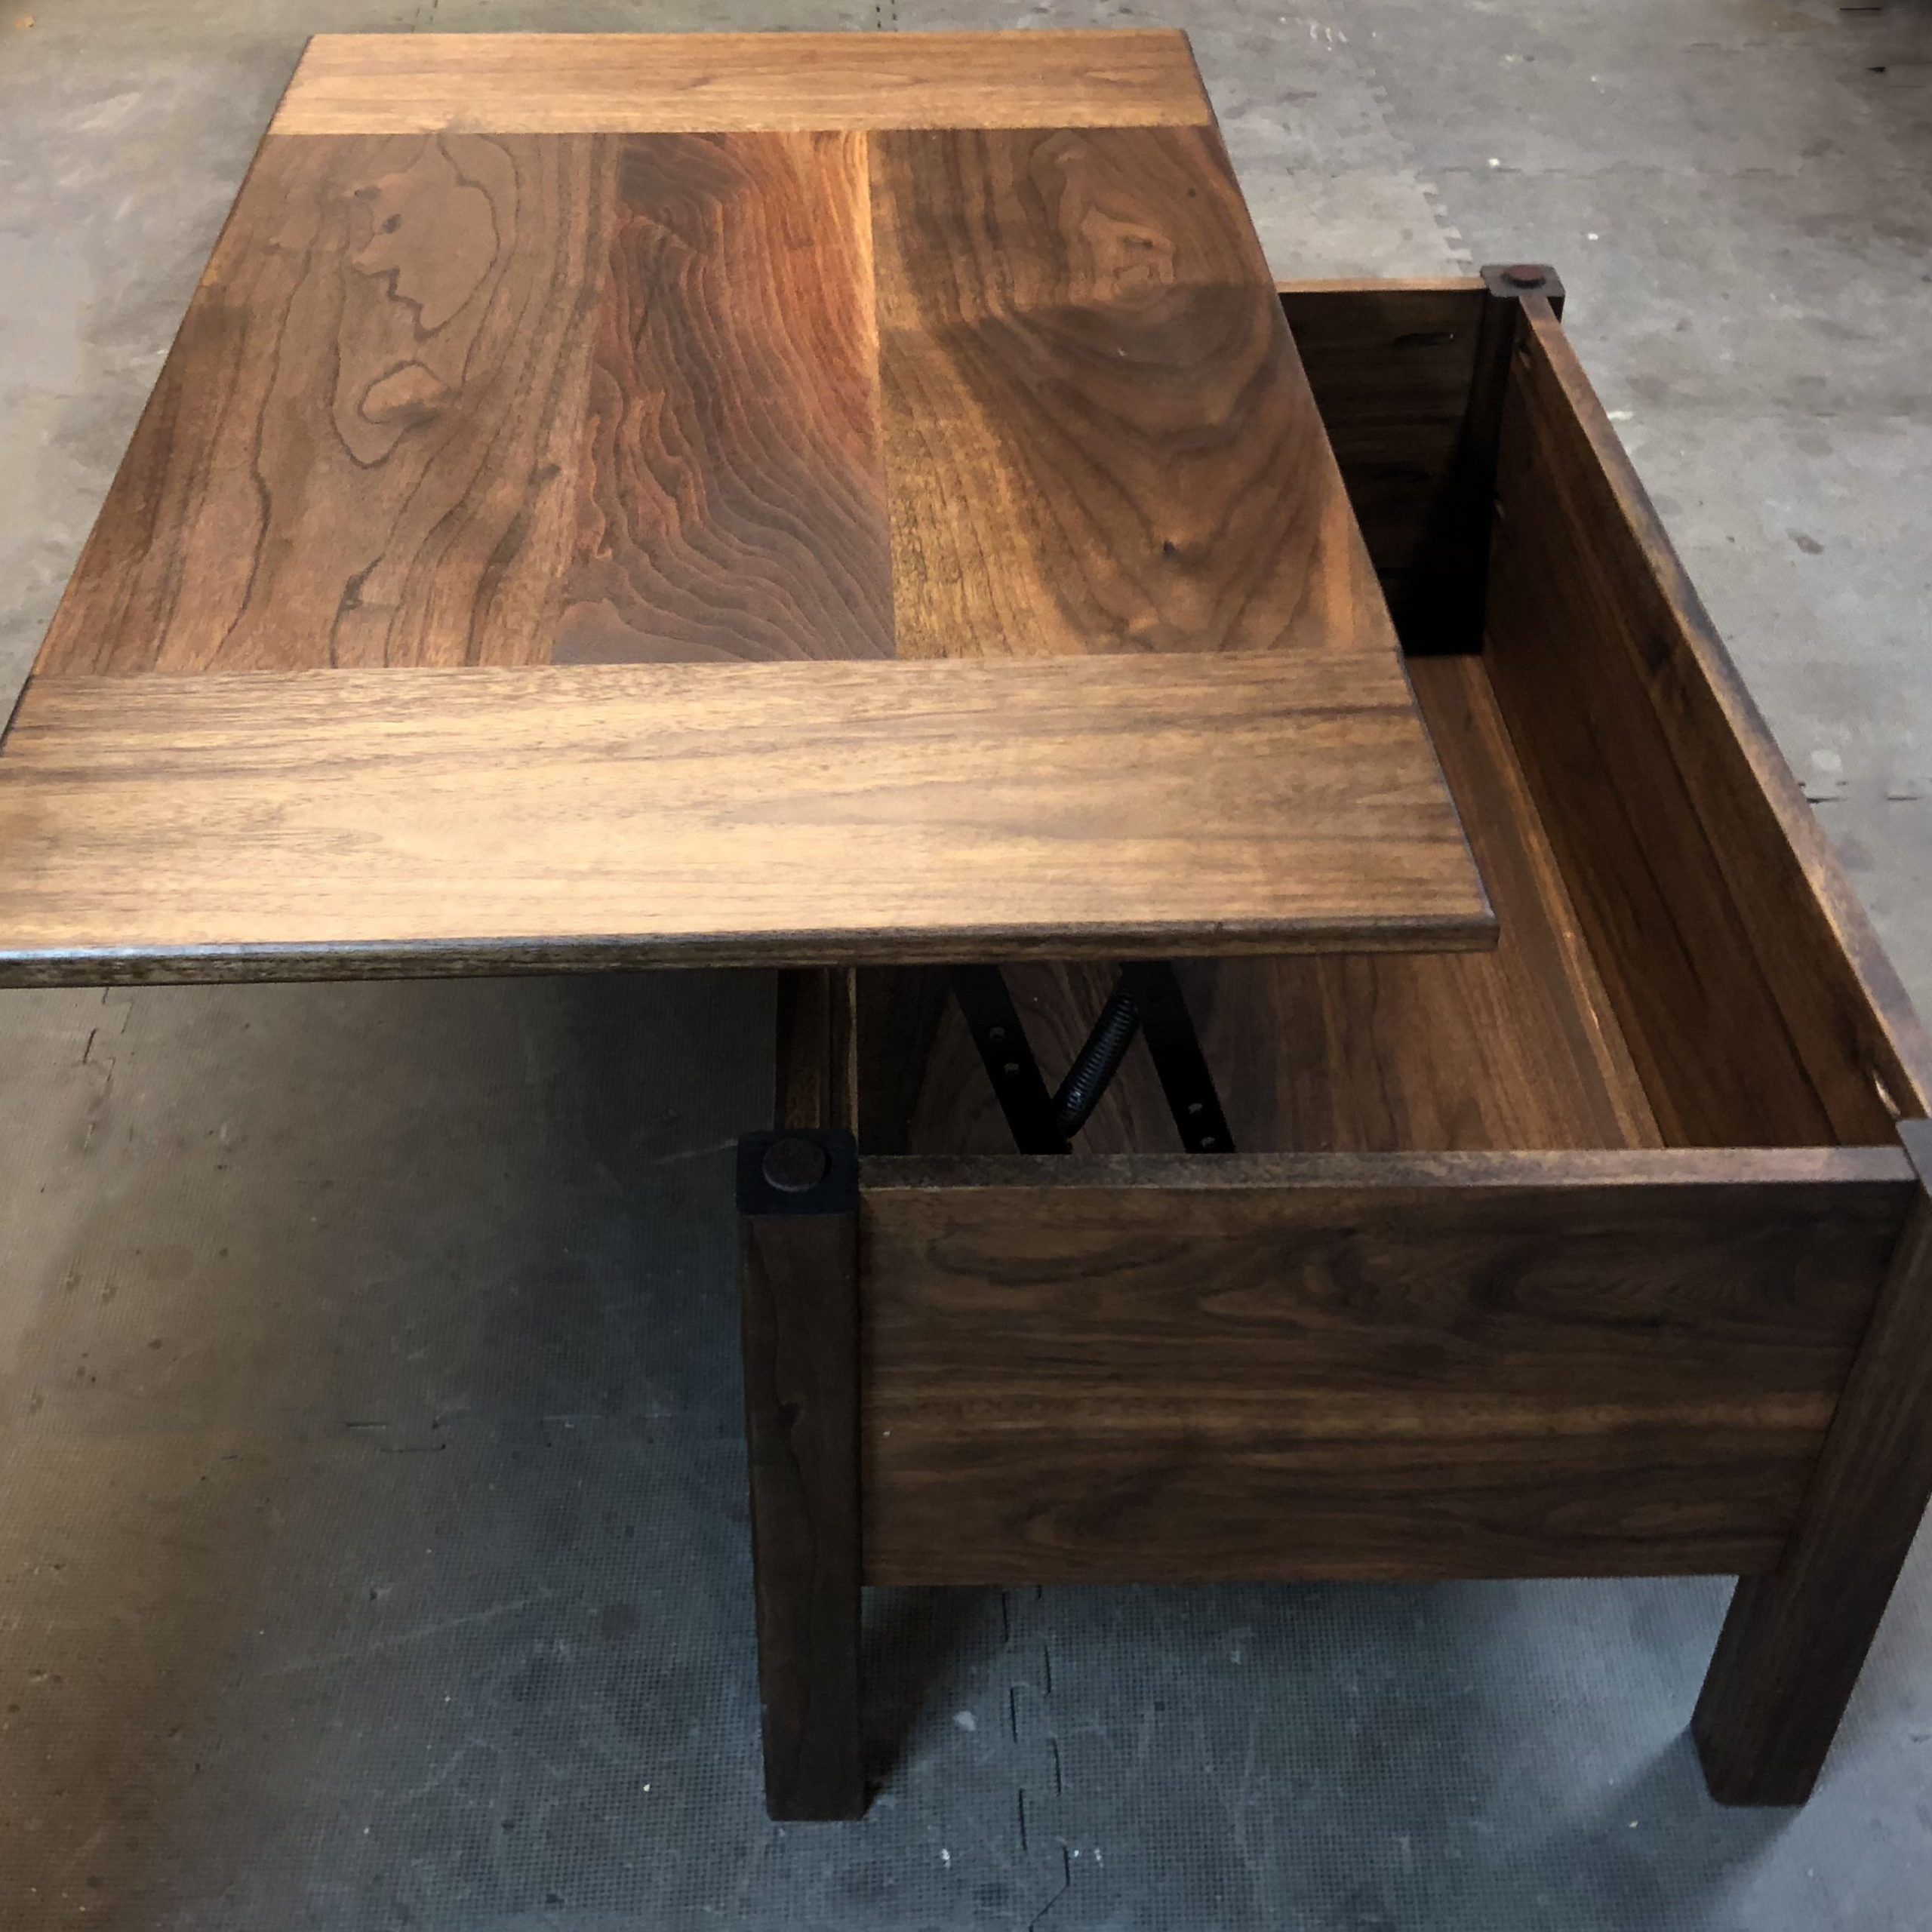 Buy Hand Made Lift Top Combination Storage Coffee Table And Desk Made From  Solid Hardwood Or Pine, Made To Order From Mr² Woodworking | Custommade For Modern Wooden Lift Top Tables (View 12 of 15)